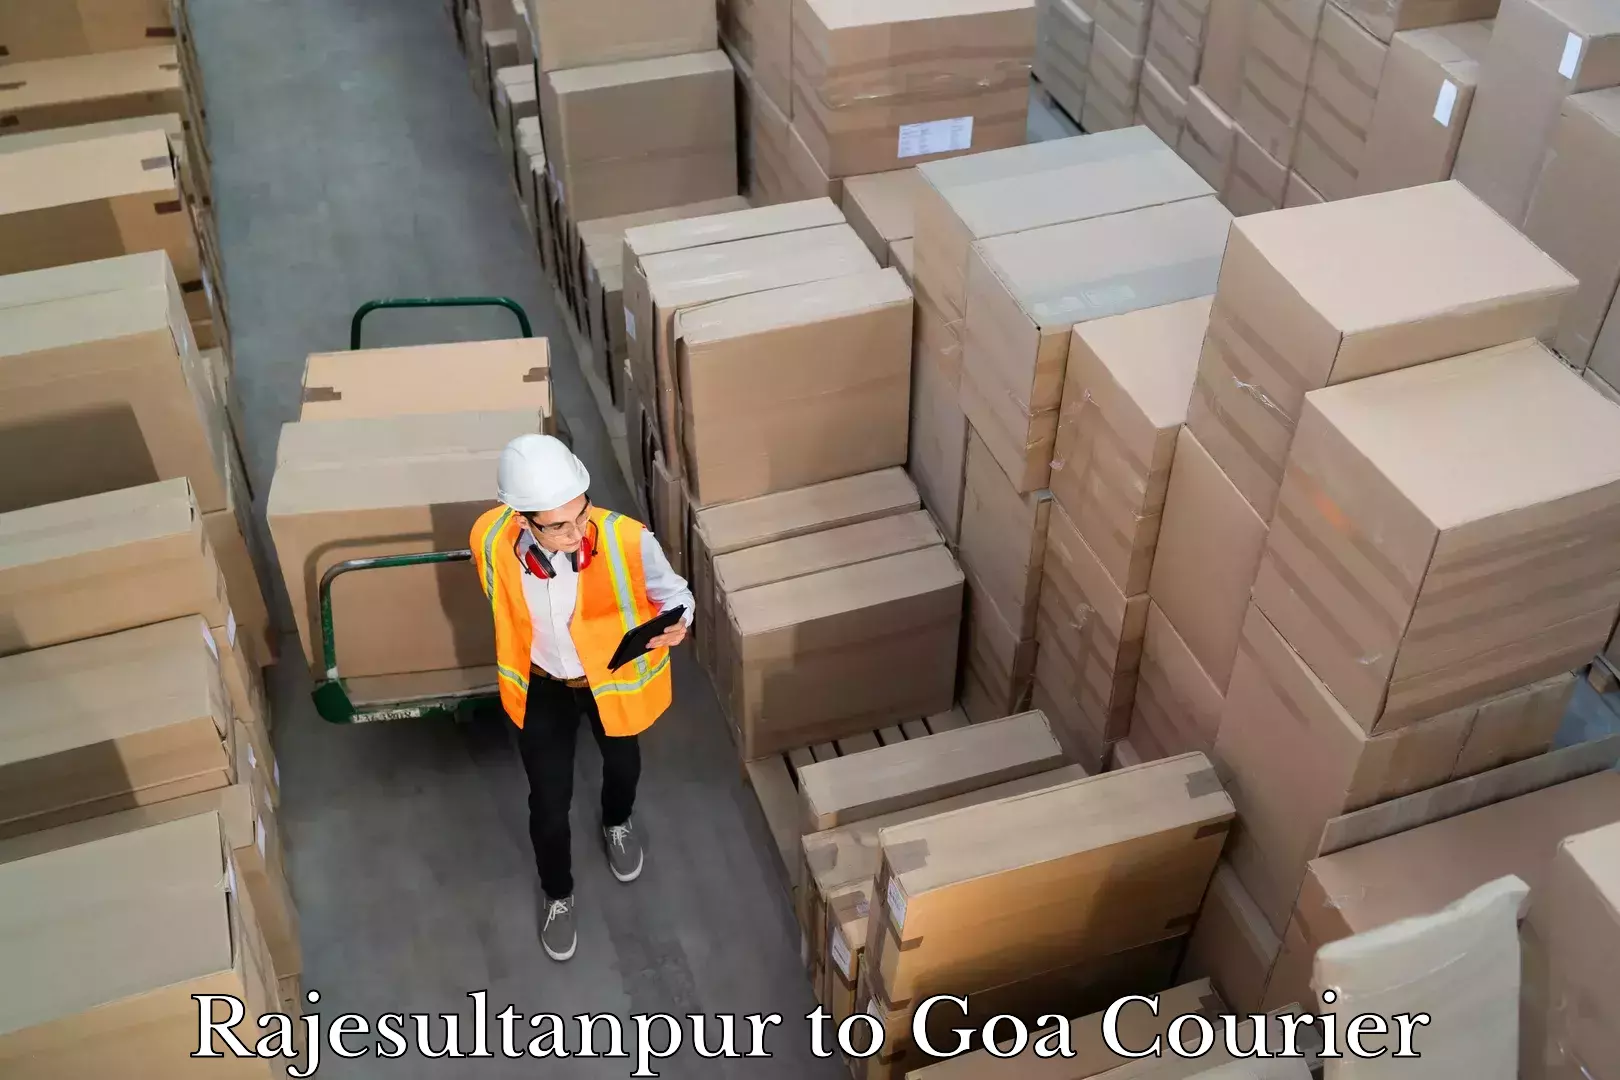 Efficient courier operations in Rajesultanpur to Goa